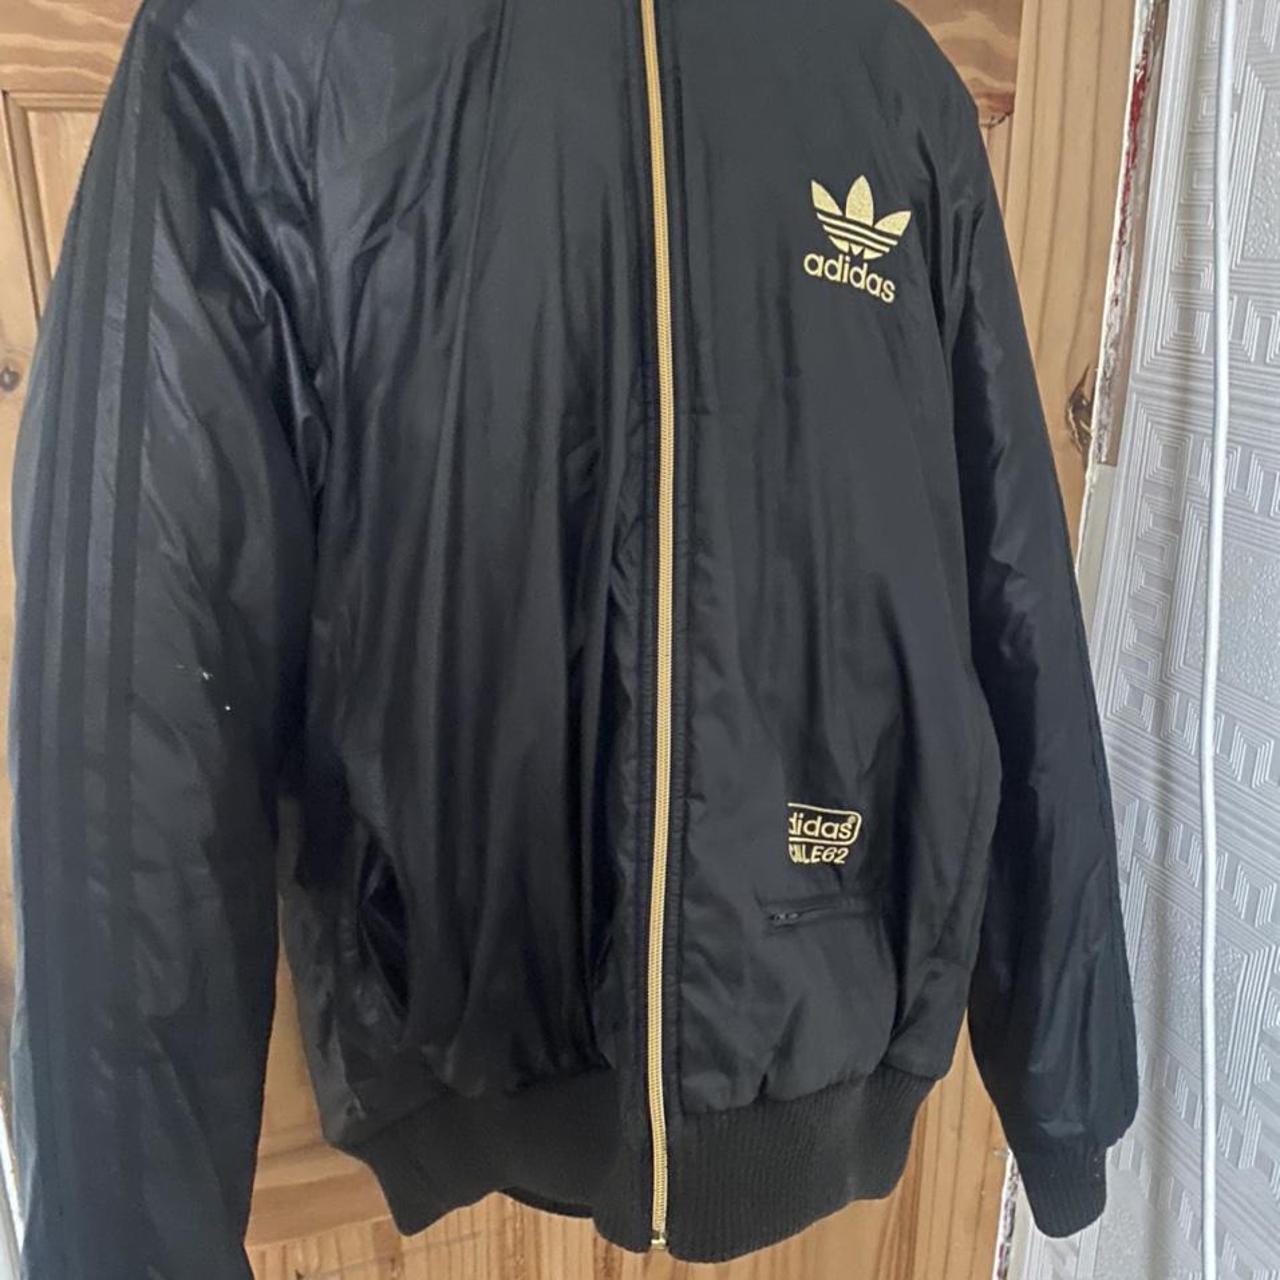 Mens Adidas Chile 62 Jacket with fur lined hood.... - Depop